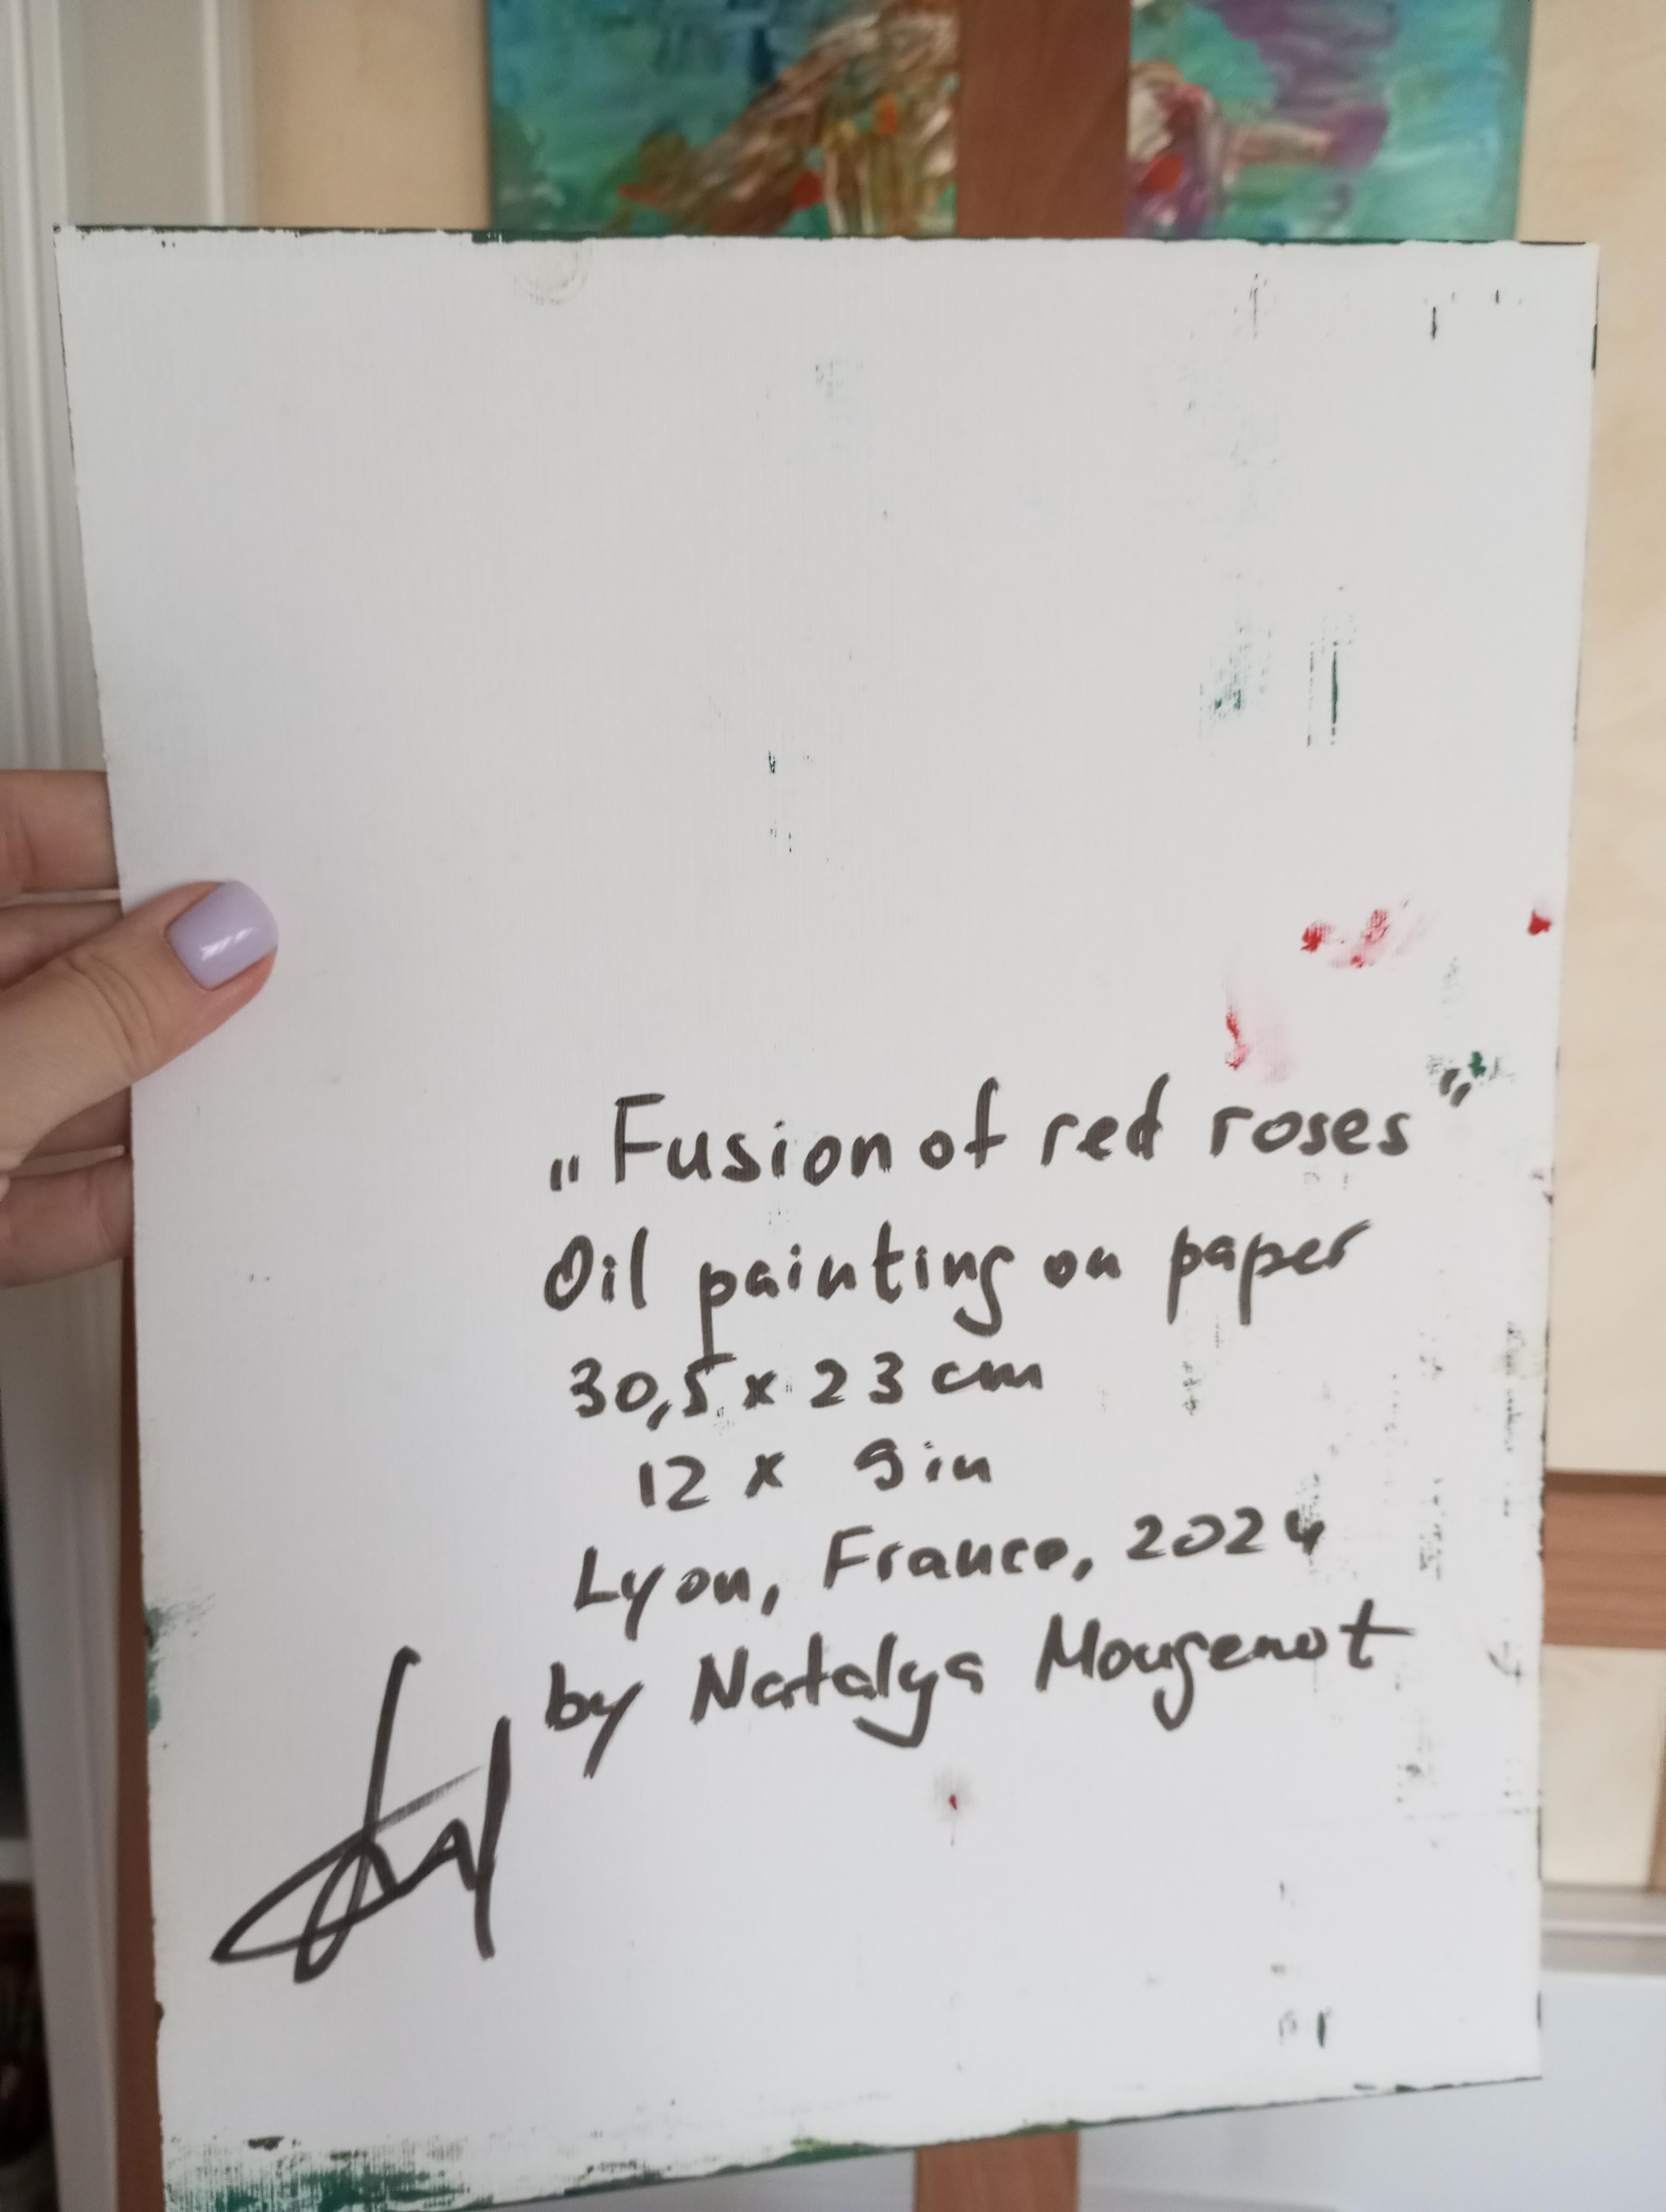 Fusion of red roses  - Brown Abstract Painting by Natalya Mougenot 